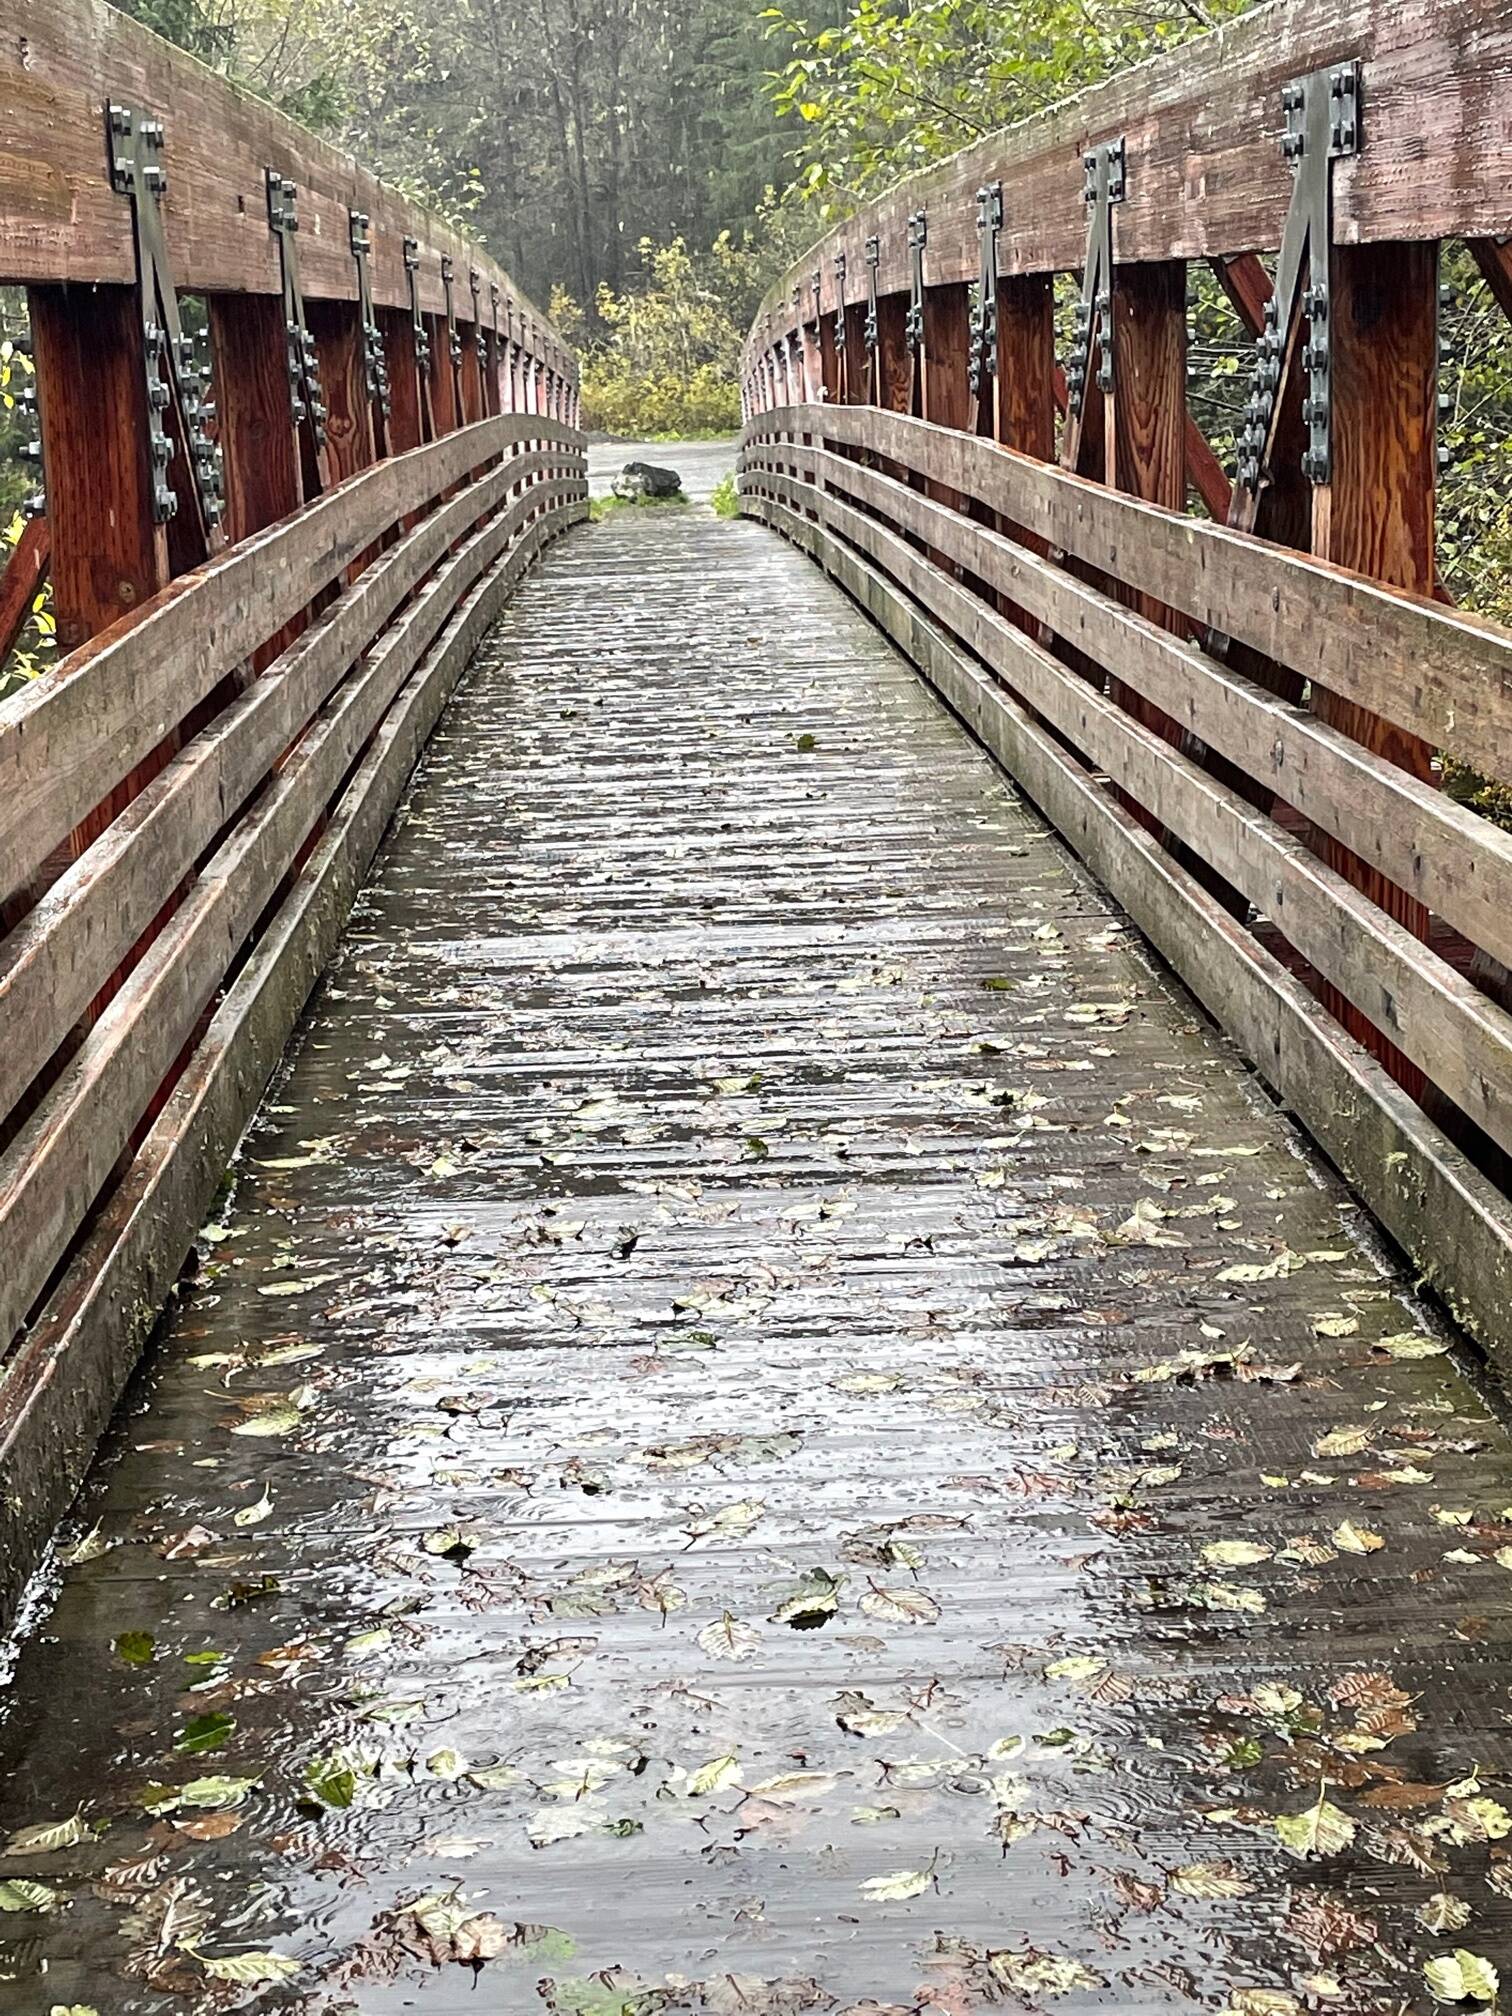 This photo shows the foot bridge over Fish Creek on Oct. 14, 2021. (Courtesy Photo / Kerry Lindley)